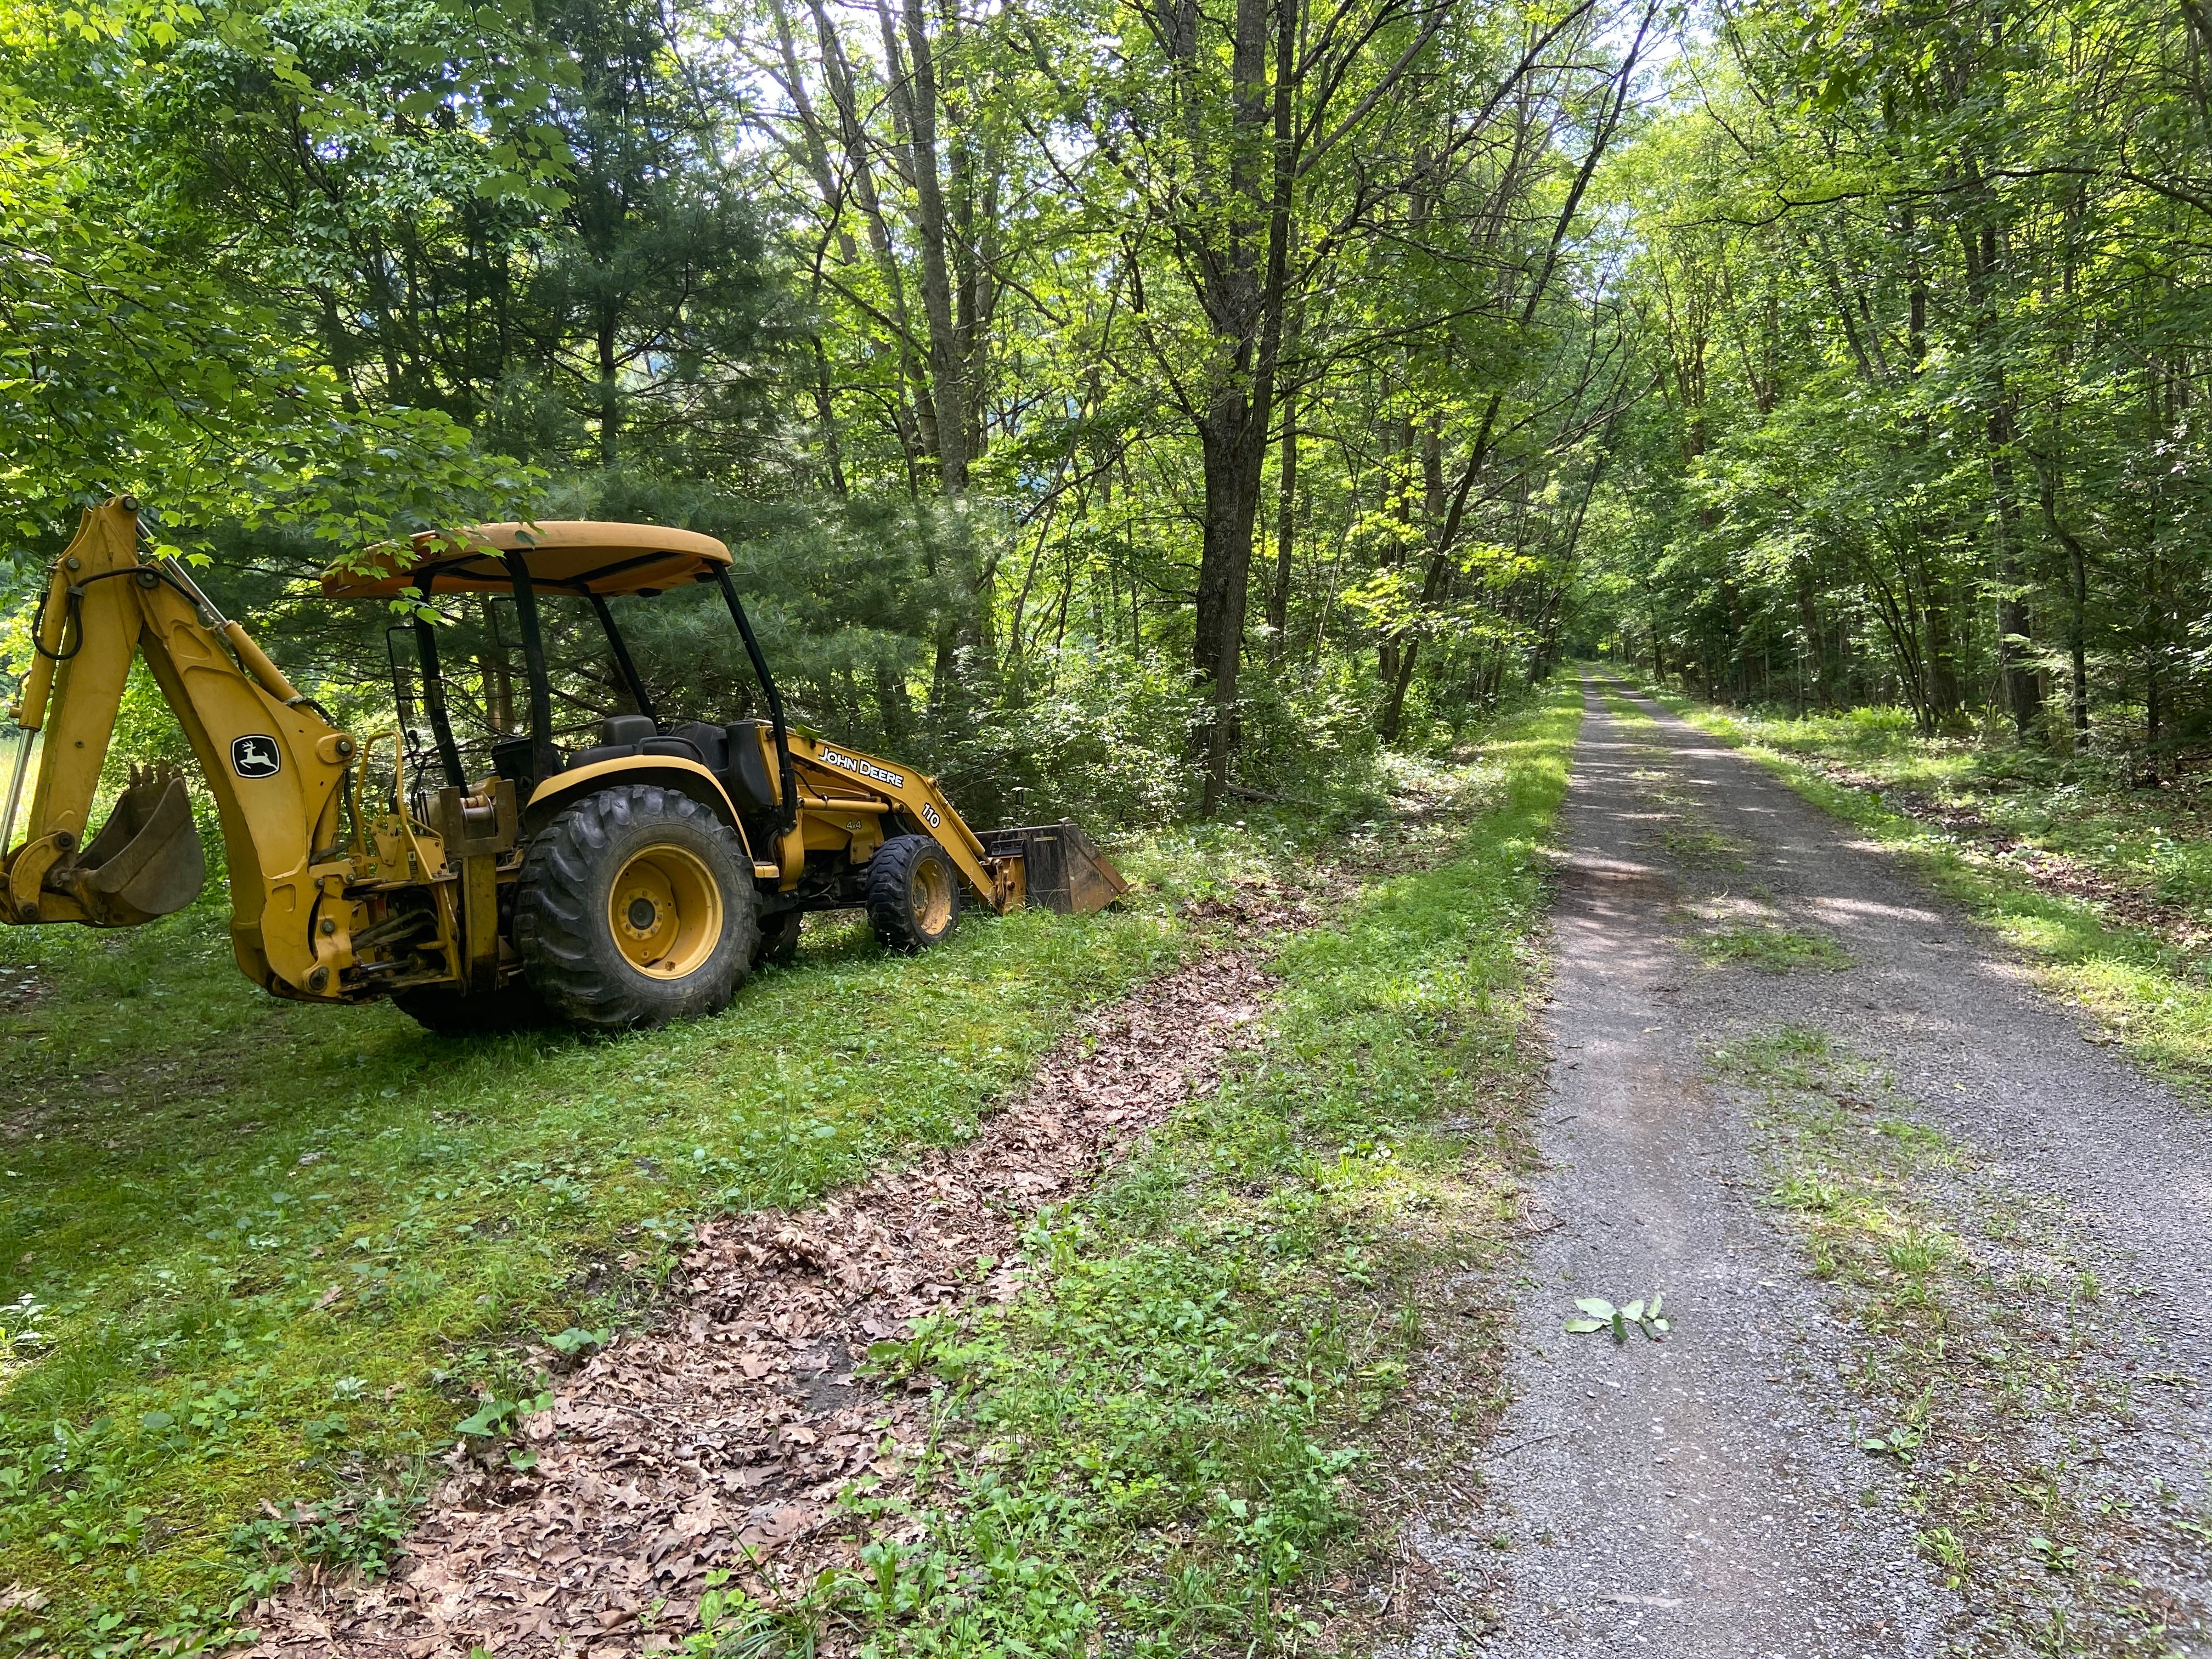 With abundant rains and common “blow downs” the State Park employees were always working hard to keep the trail open and free of debri